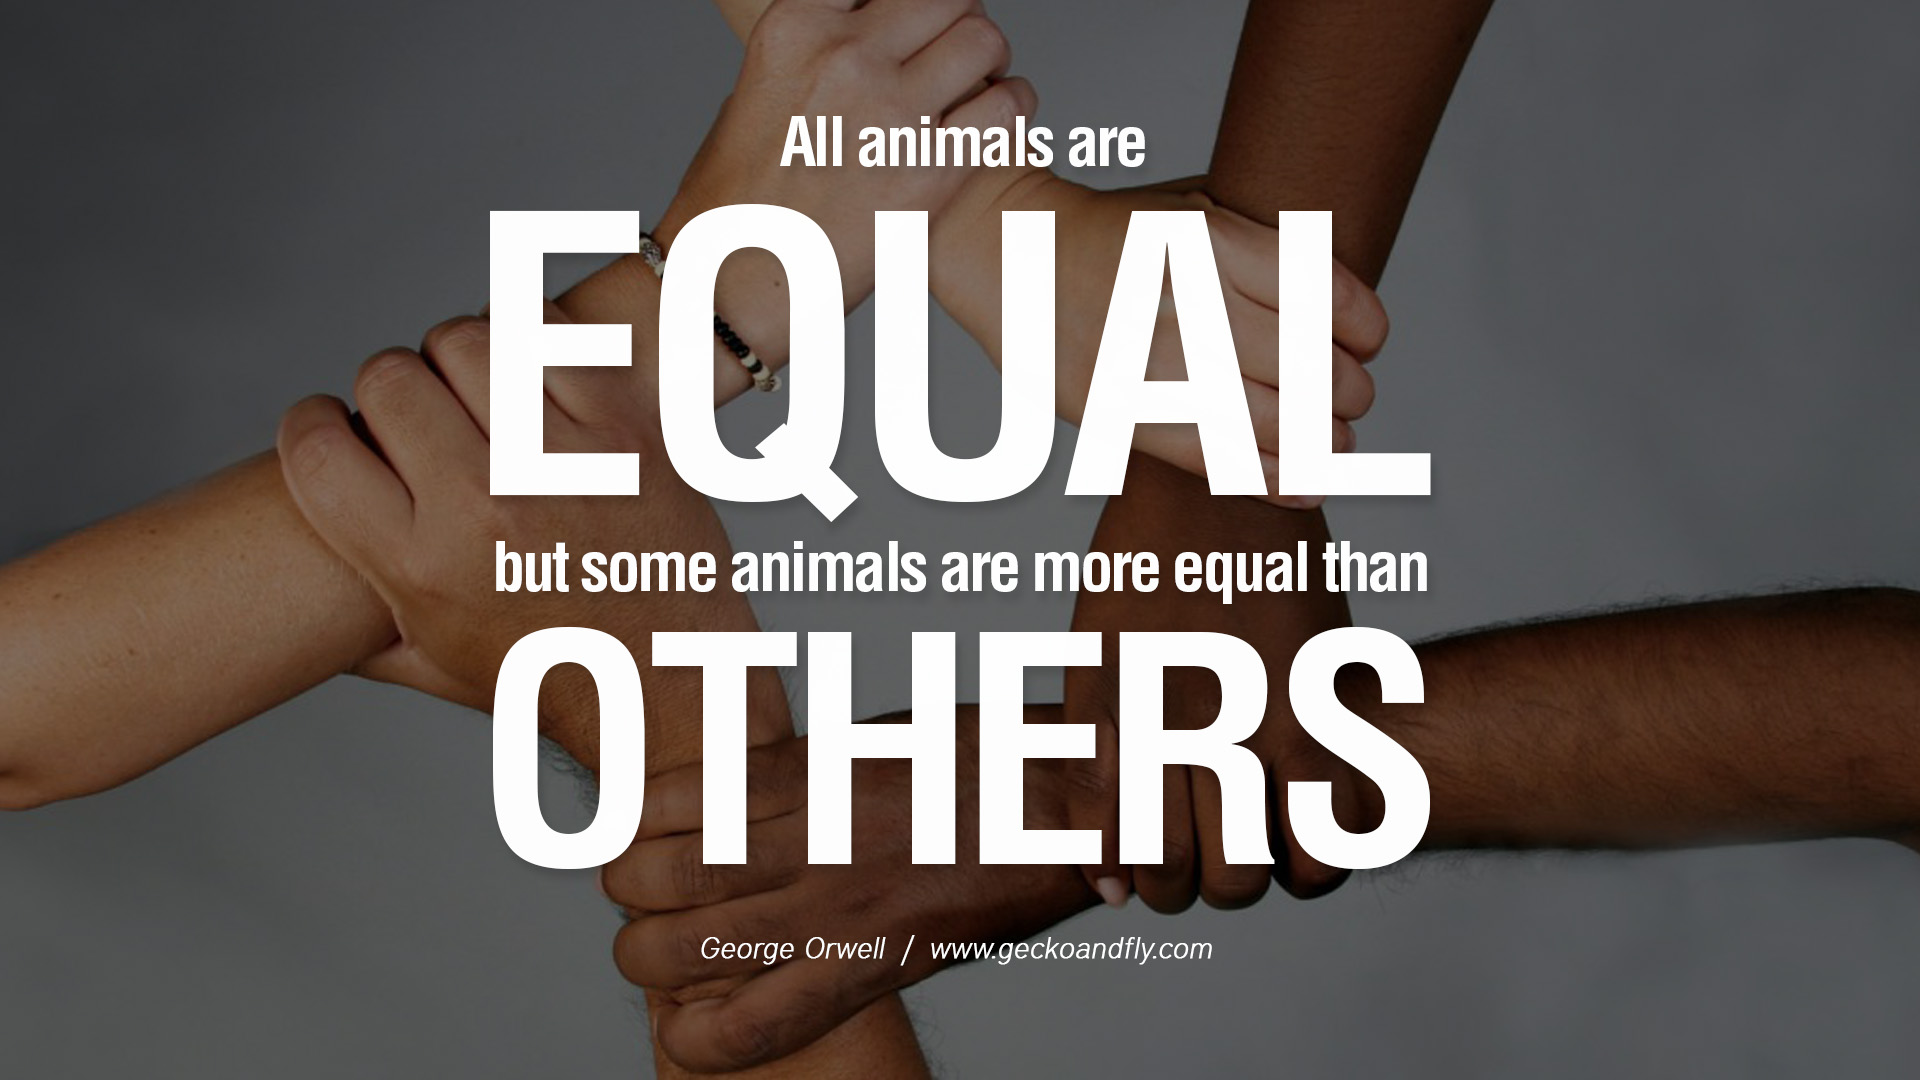 All animals are equal but some animals are more equal than others. "All animals are equal, but some animals are more equal than others..." Georges Orwell. Some are more equal than others кто сказал. Humanize text